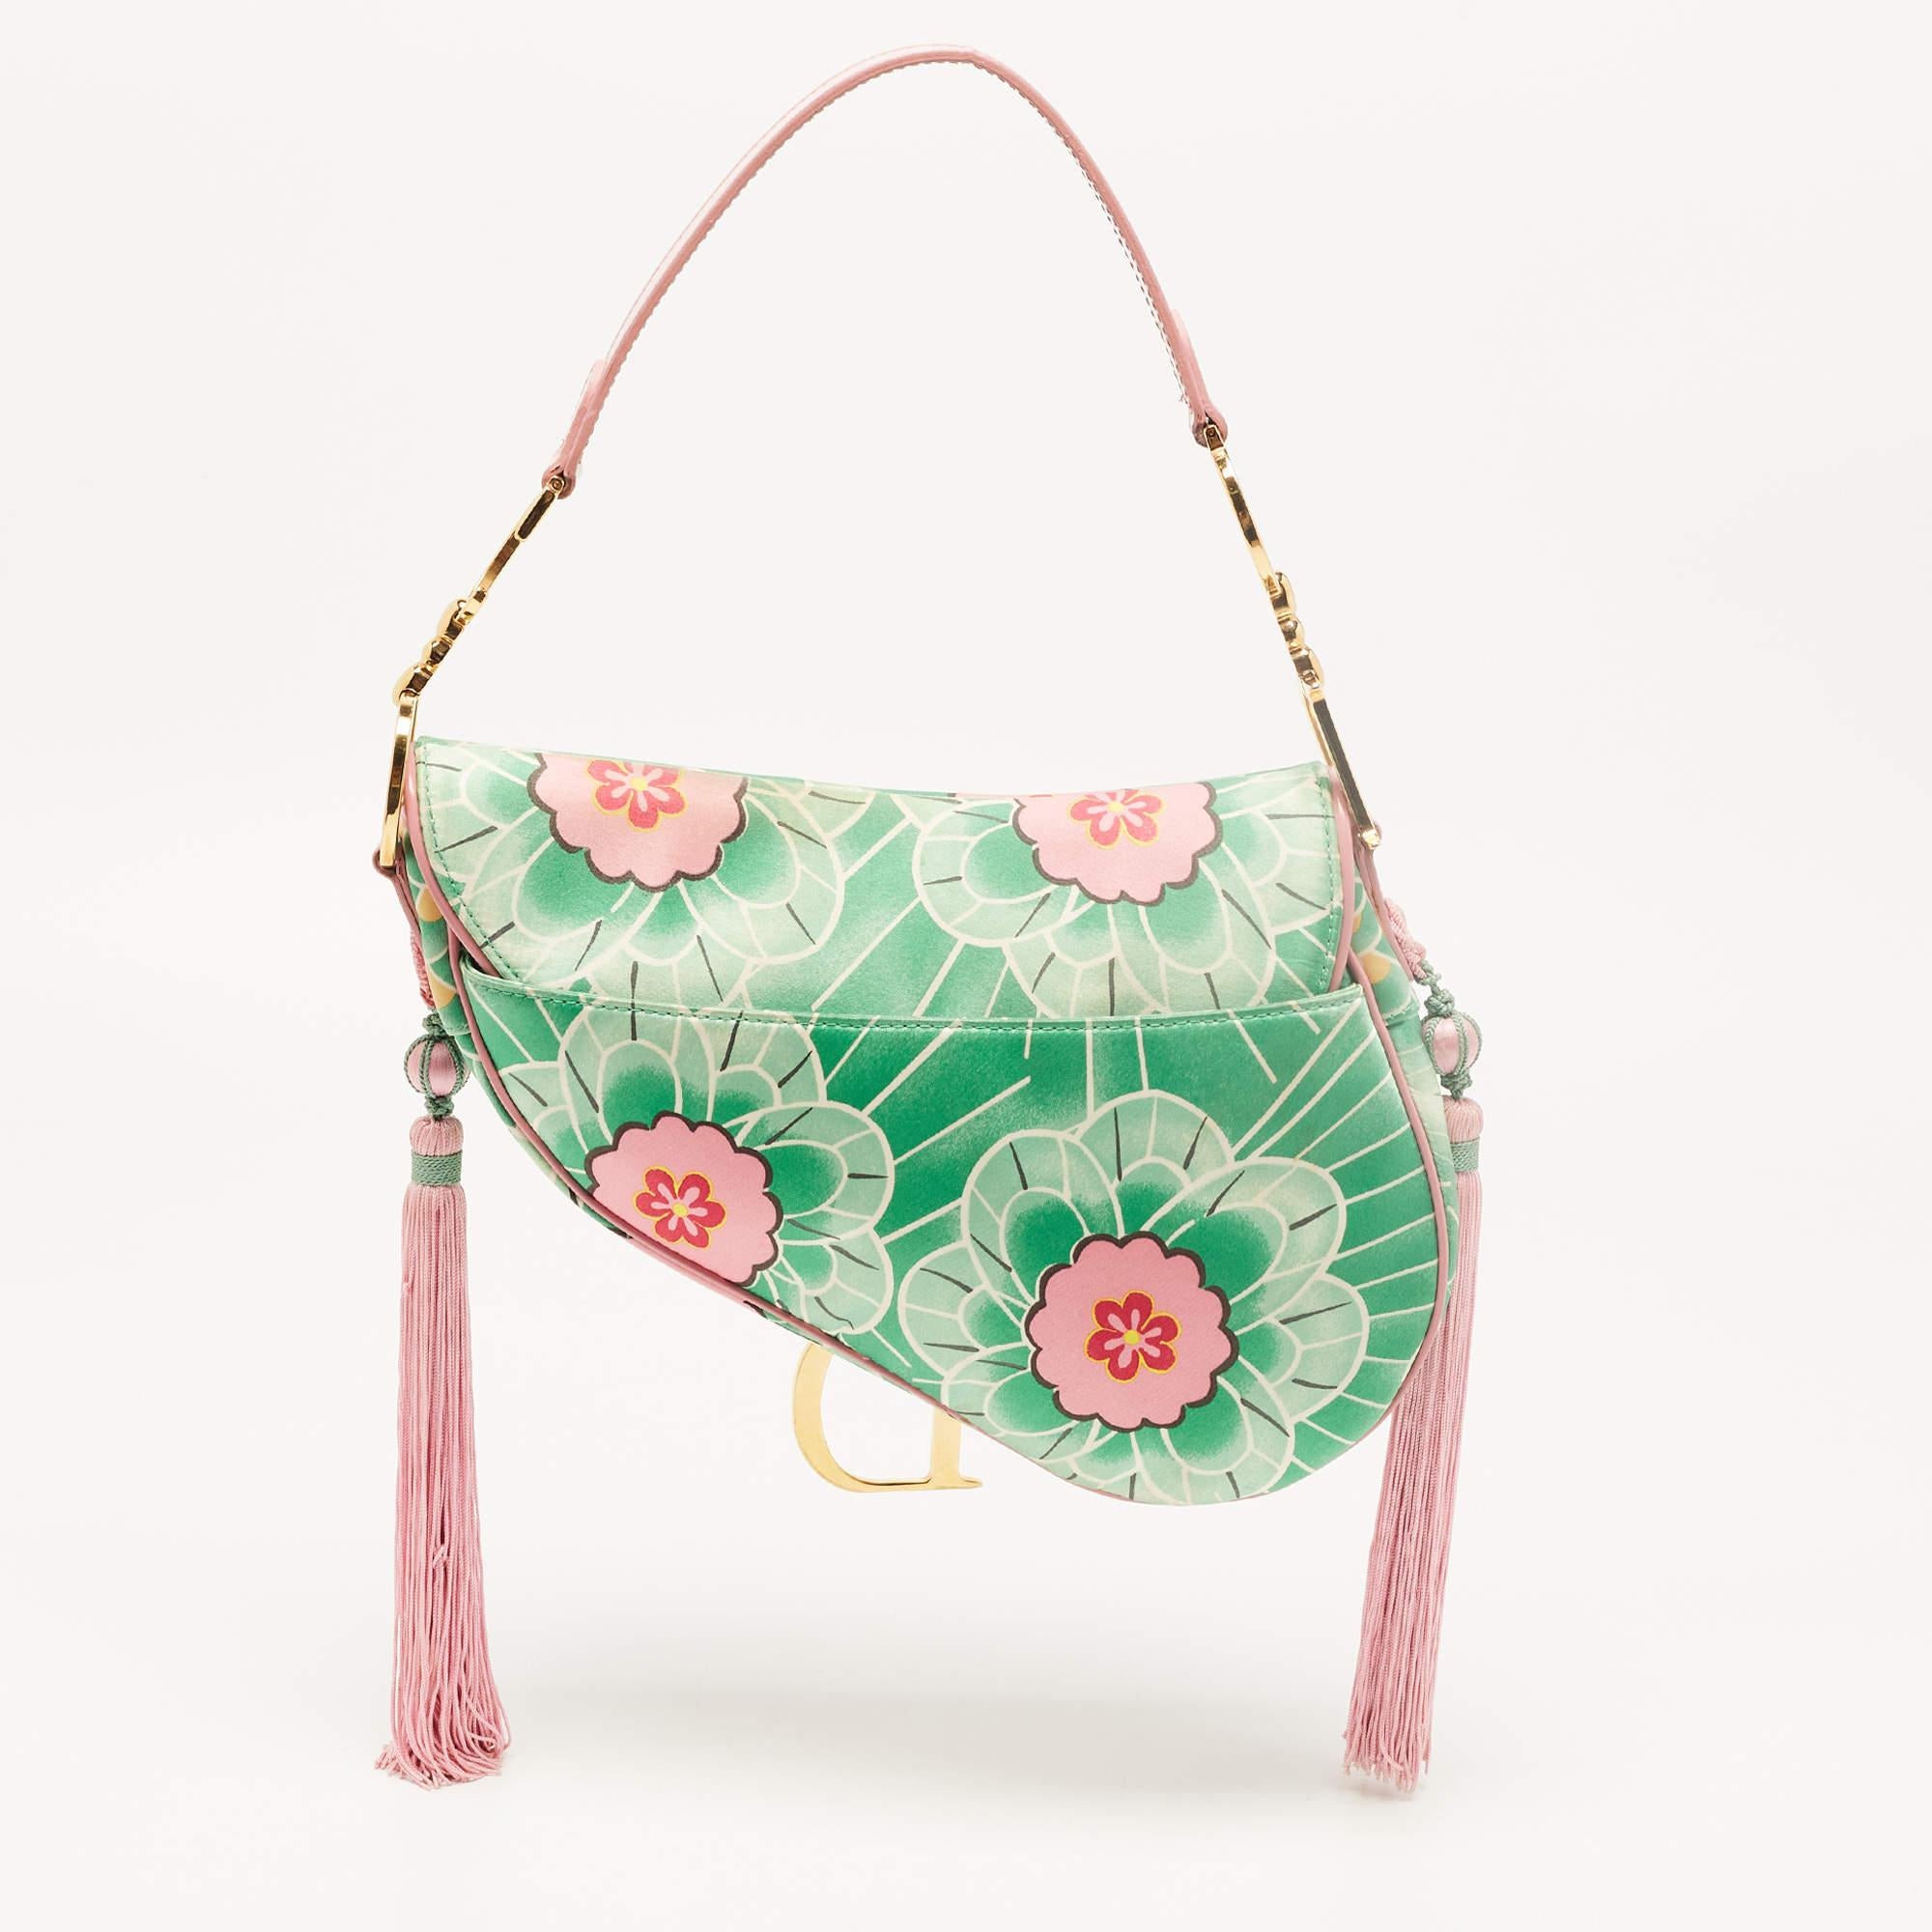 Designed by John Galliano, the Dior Saddle bag is an investment-worthy creation and an icon in the world of handbags. Here, we have a splendid limited edition version of the bag. It is made from printed satin & glazed leather and detailed with pink